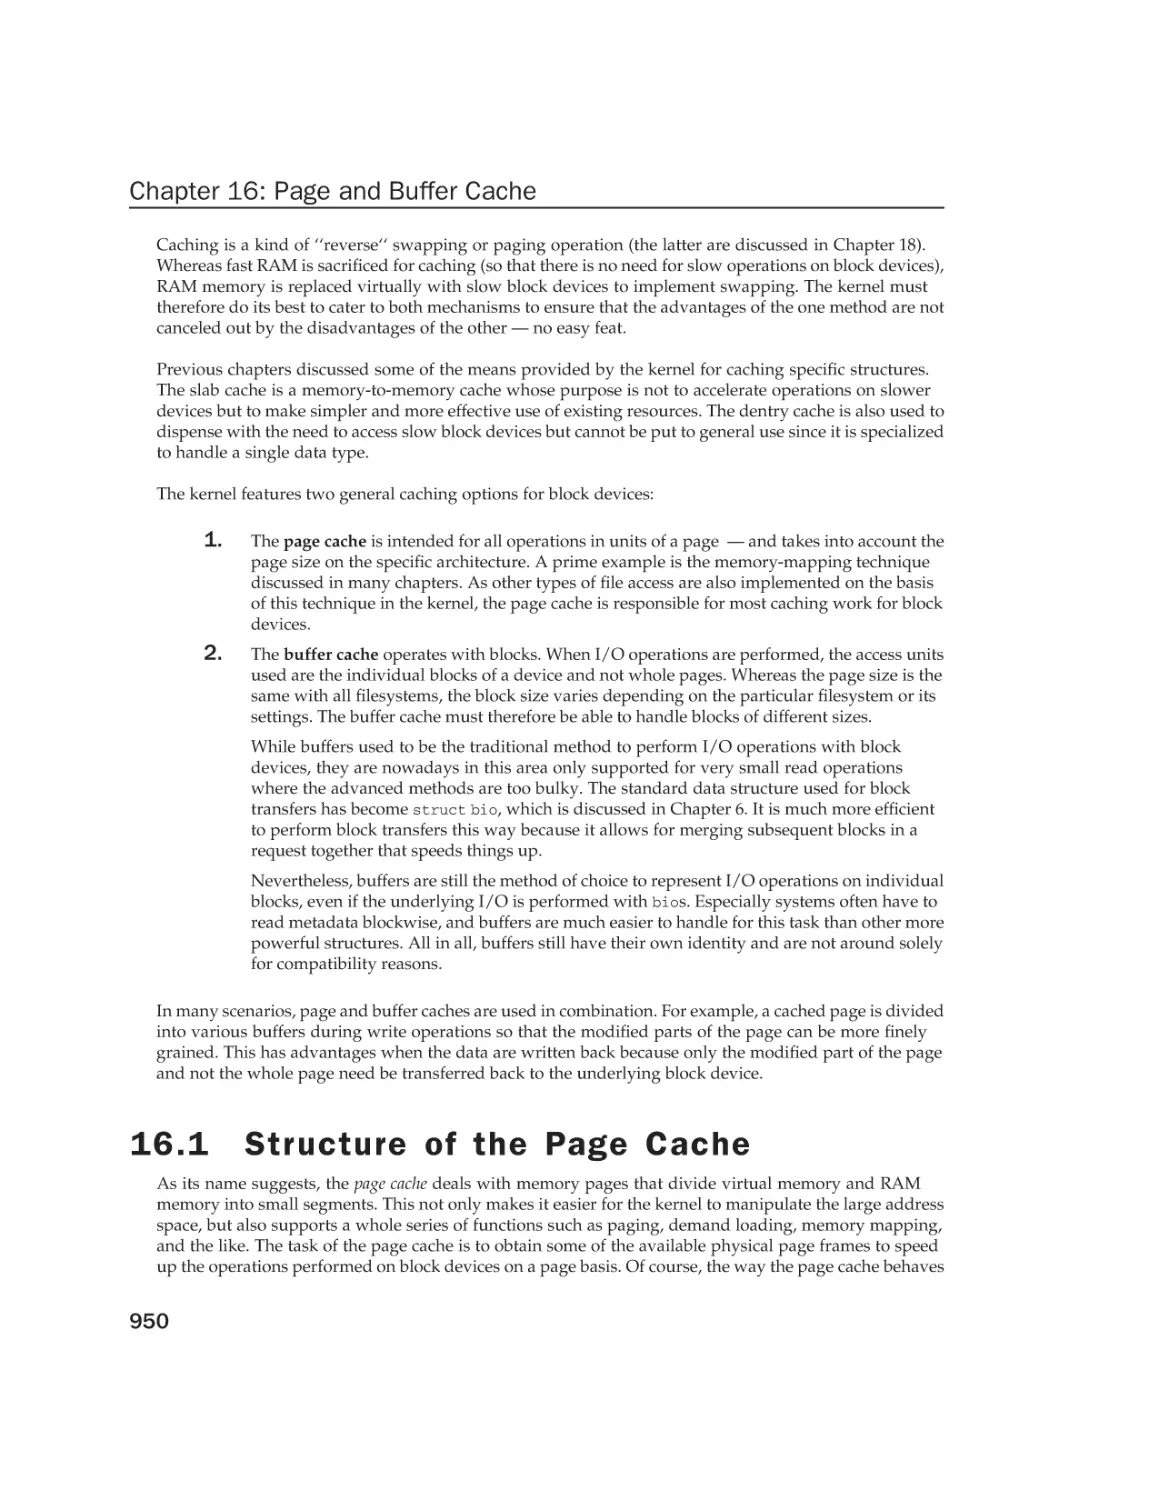 16.1 Structure of the Page Cache